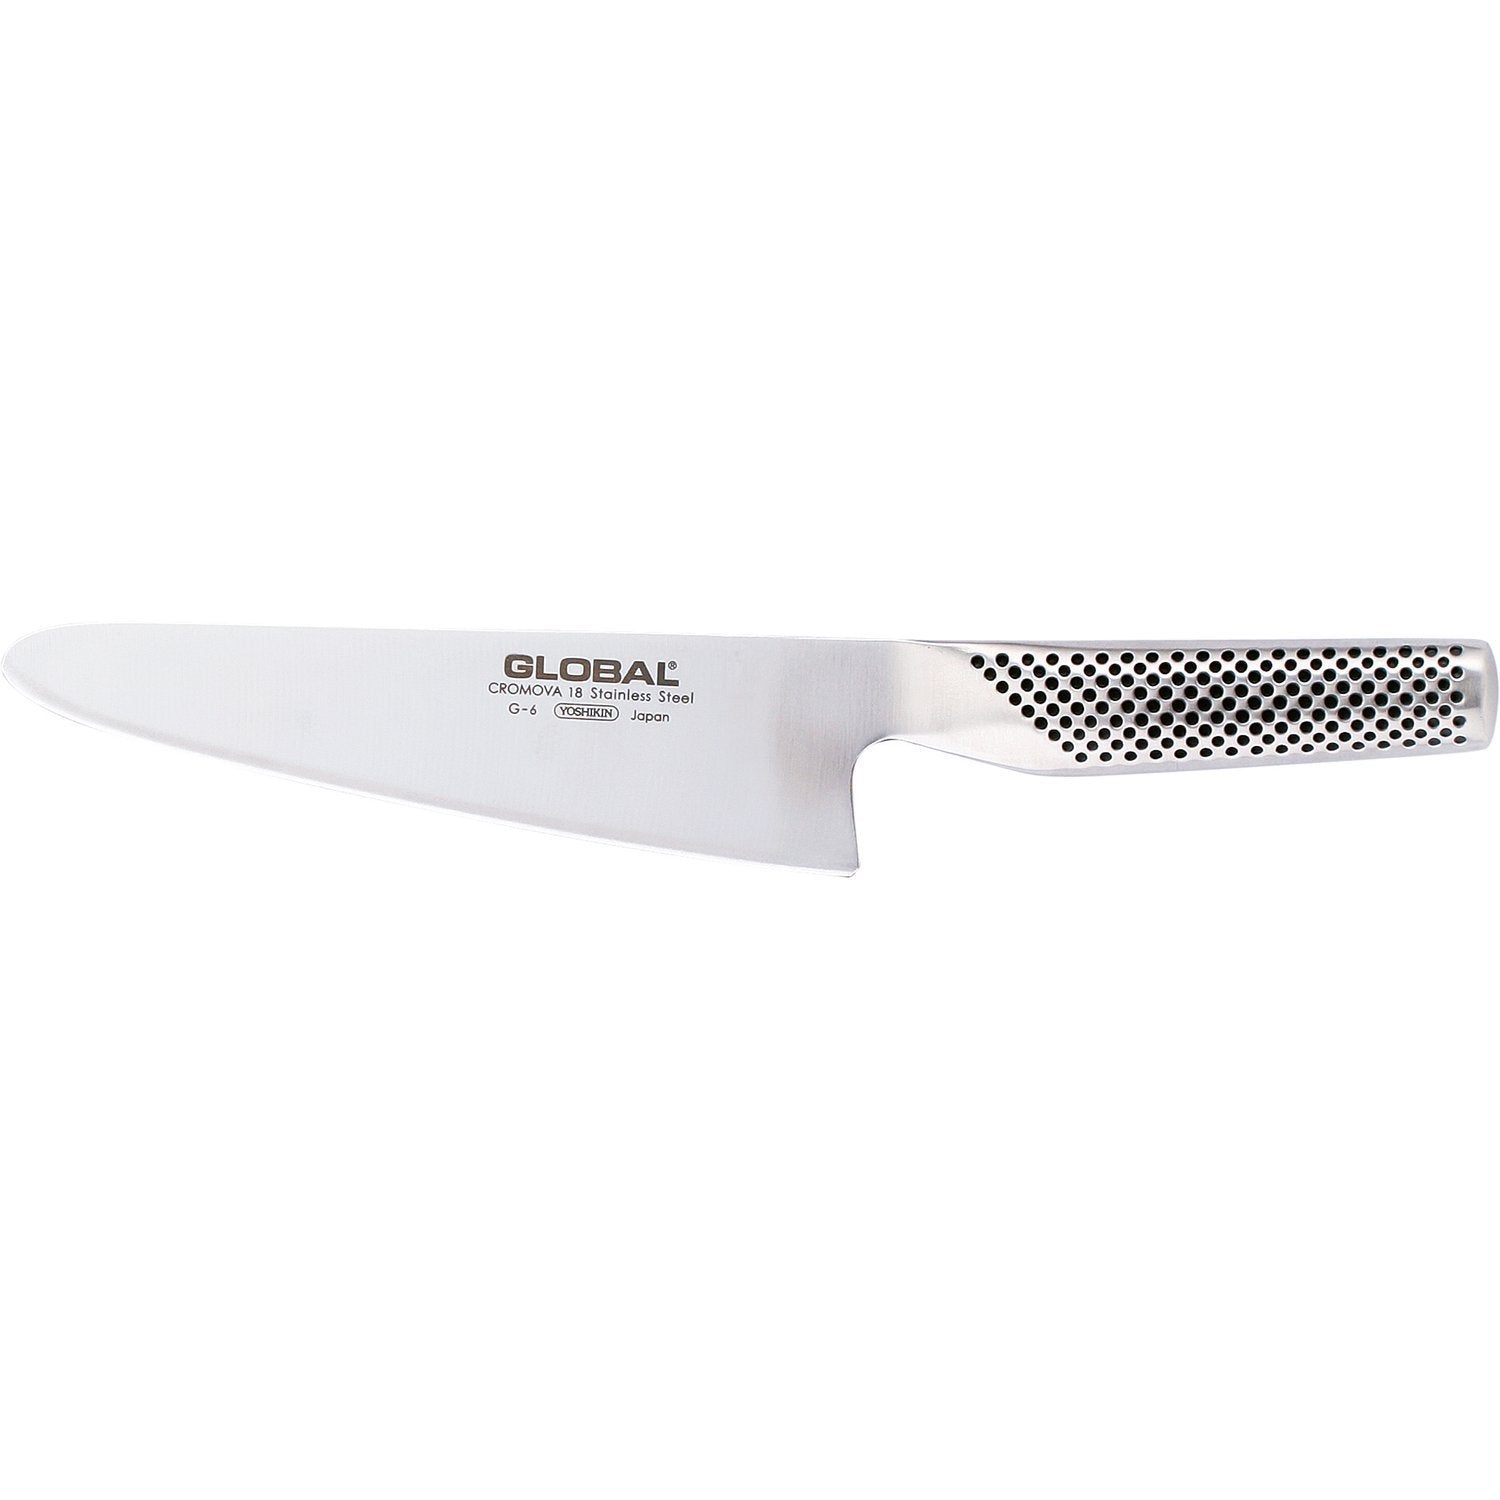 Global G 6 Meat Couteau, 18 cm